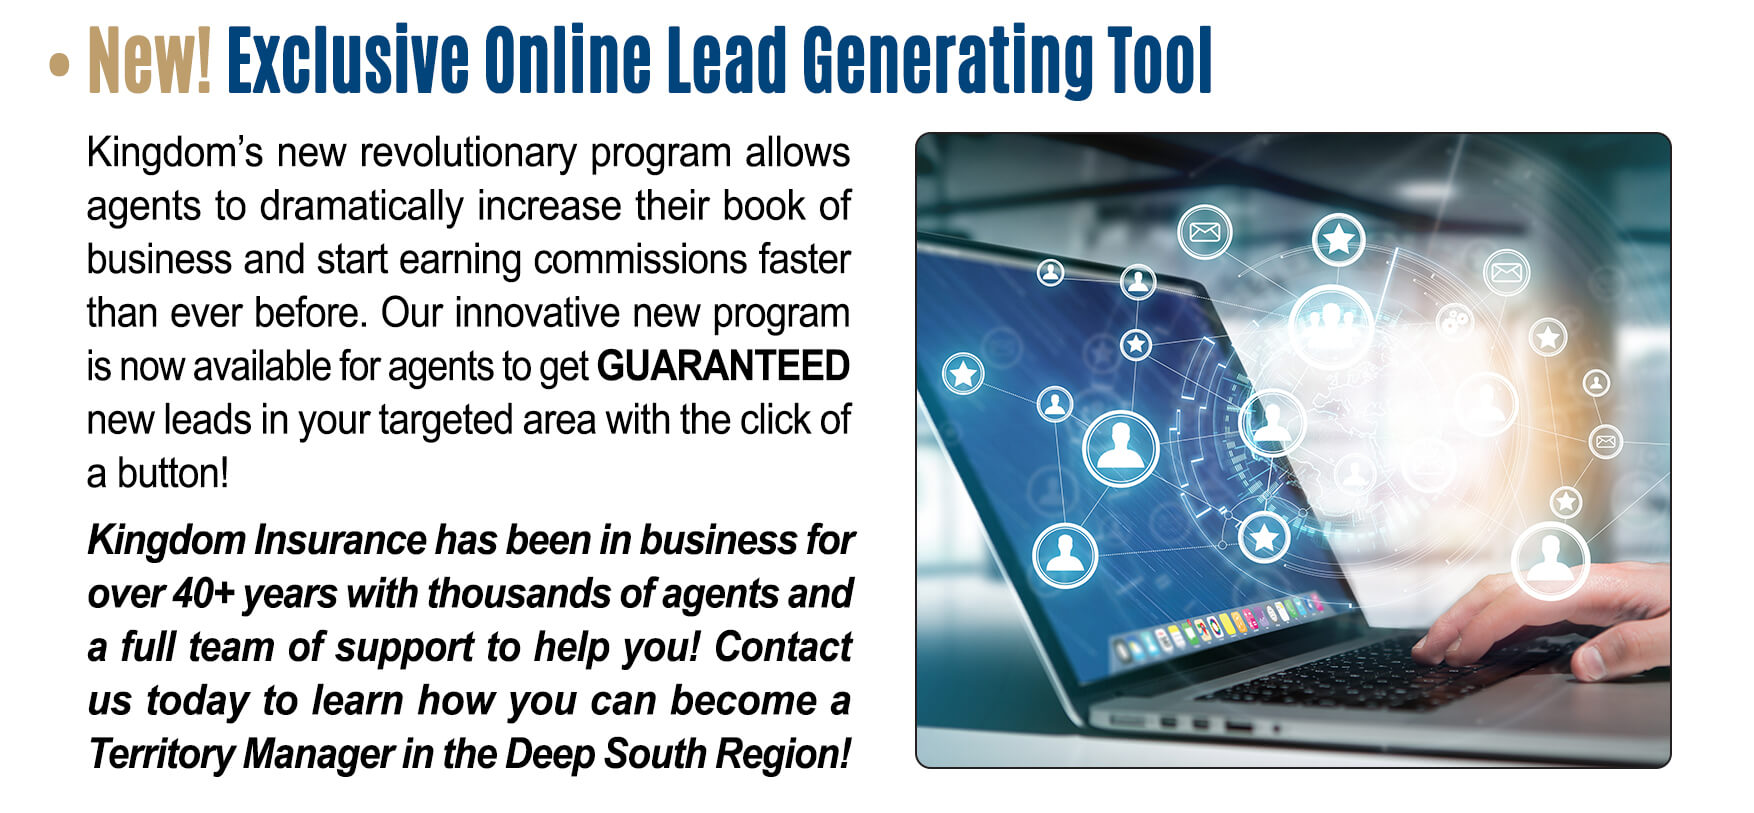 New! Exclusive Online Lead Generating Tool: Kingdom's new revolutionary program allows agents to dramatically increase their book of business and start earning commissions faster than ever before. Our innovative new program is now available for agents to get GUARANTEED new leads in your targeted area with the click of a button! Kingdom Insurance has been in business for over 40+ years with thousands of agents and a full team of support to help you! Contact us today to learn how you can become a Territory Manager in the Deep South Region! 